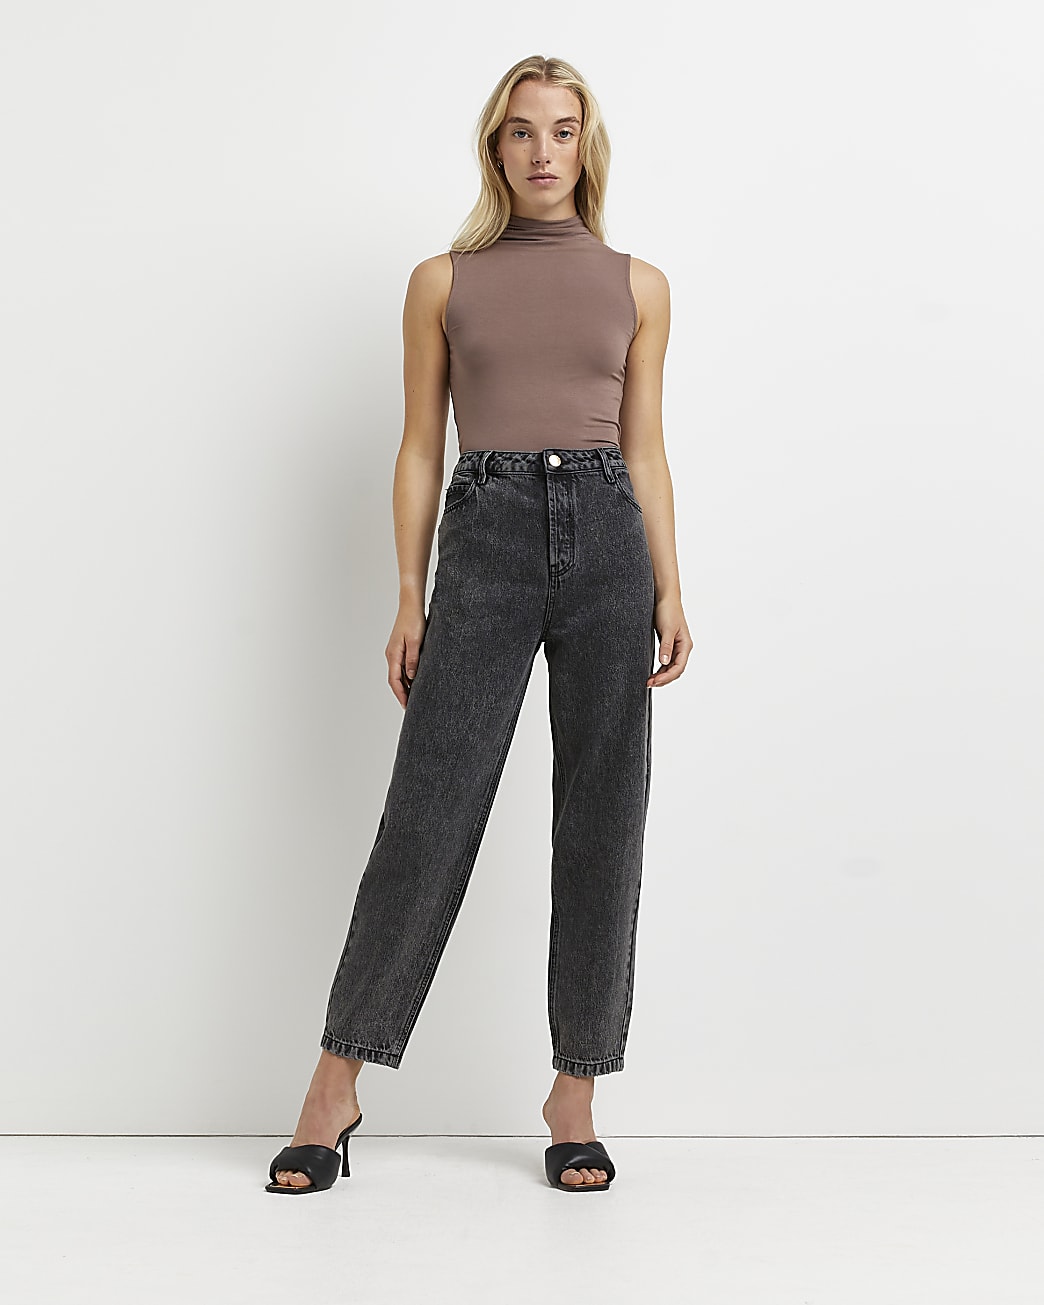 Black high waisted tapered jeans